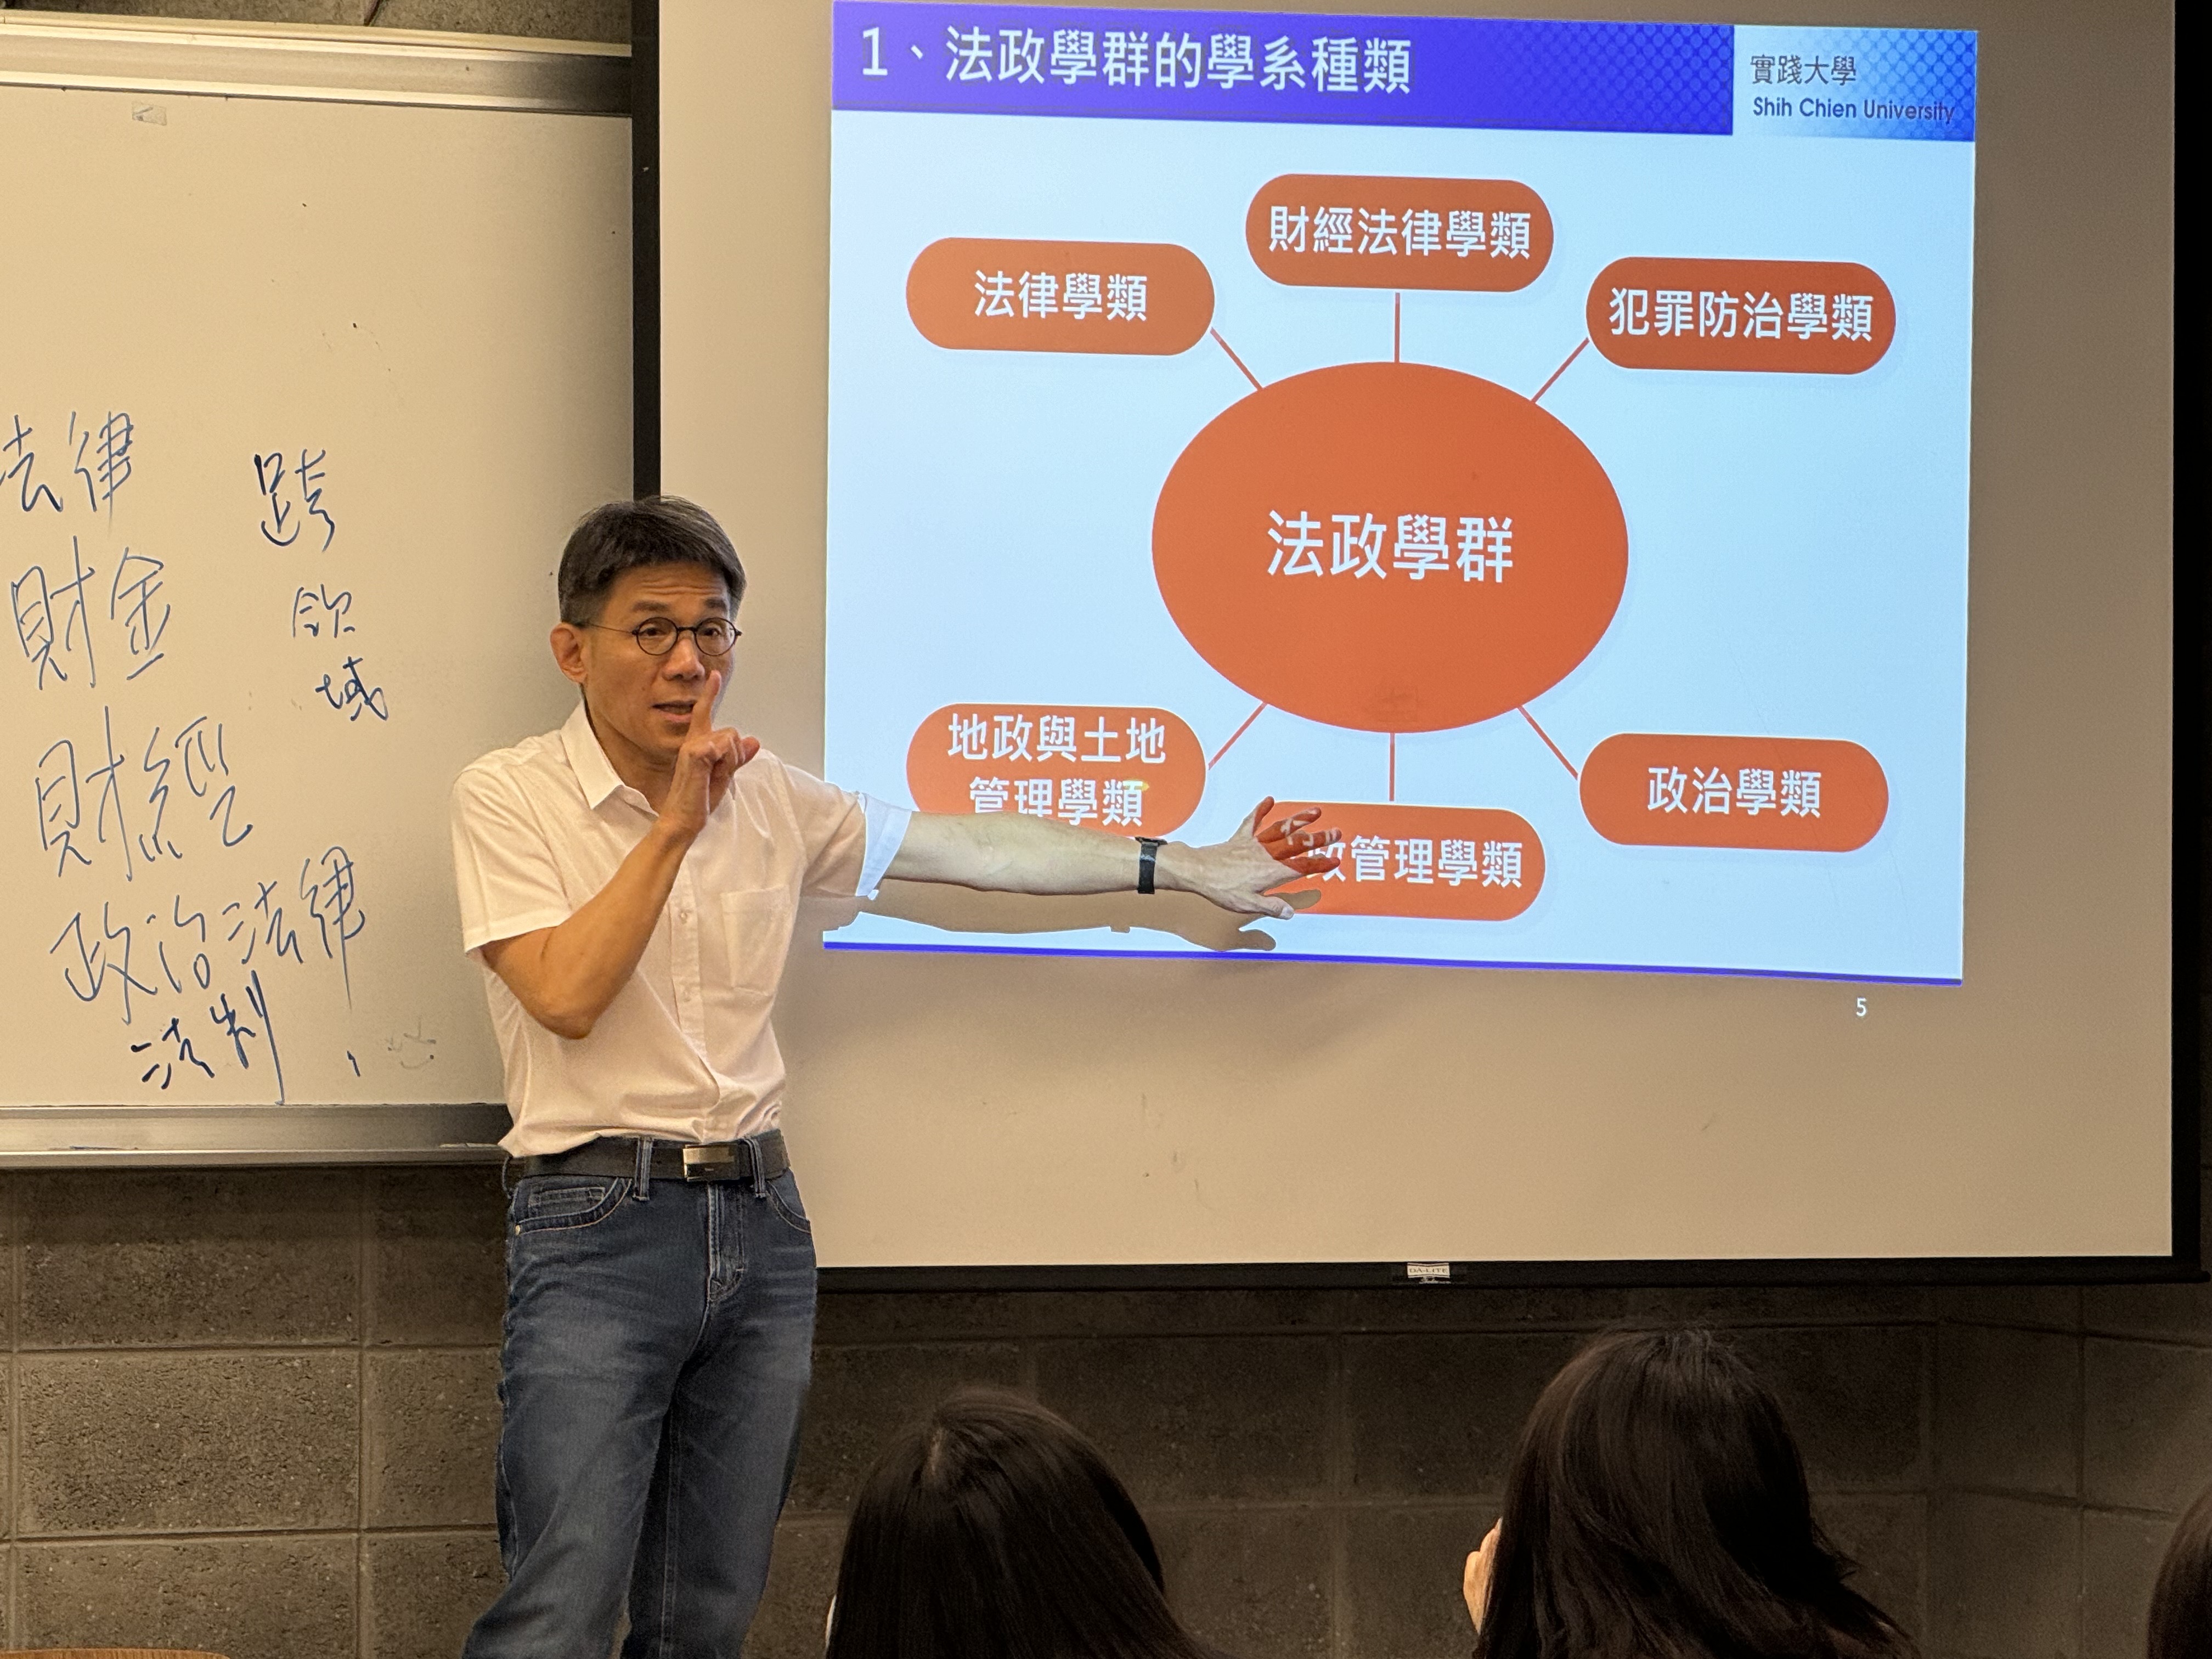 Director Jiang Chong-yuan of the Department of Law conducted a lecture for the Law and Politics group.